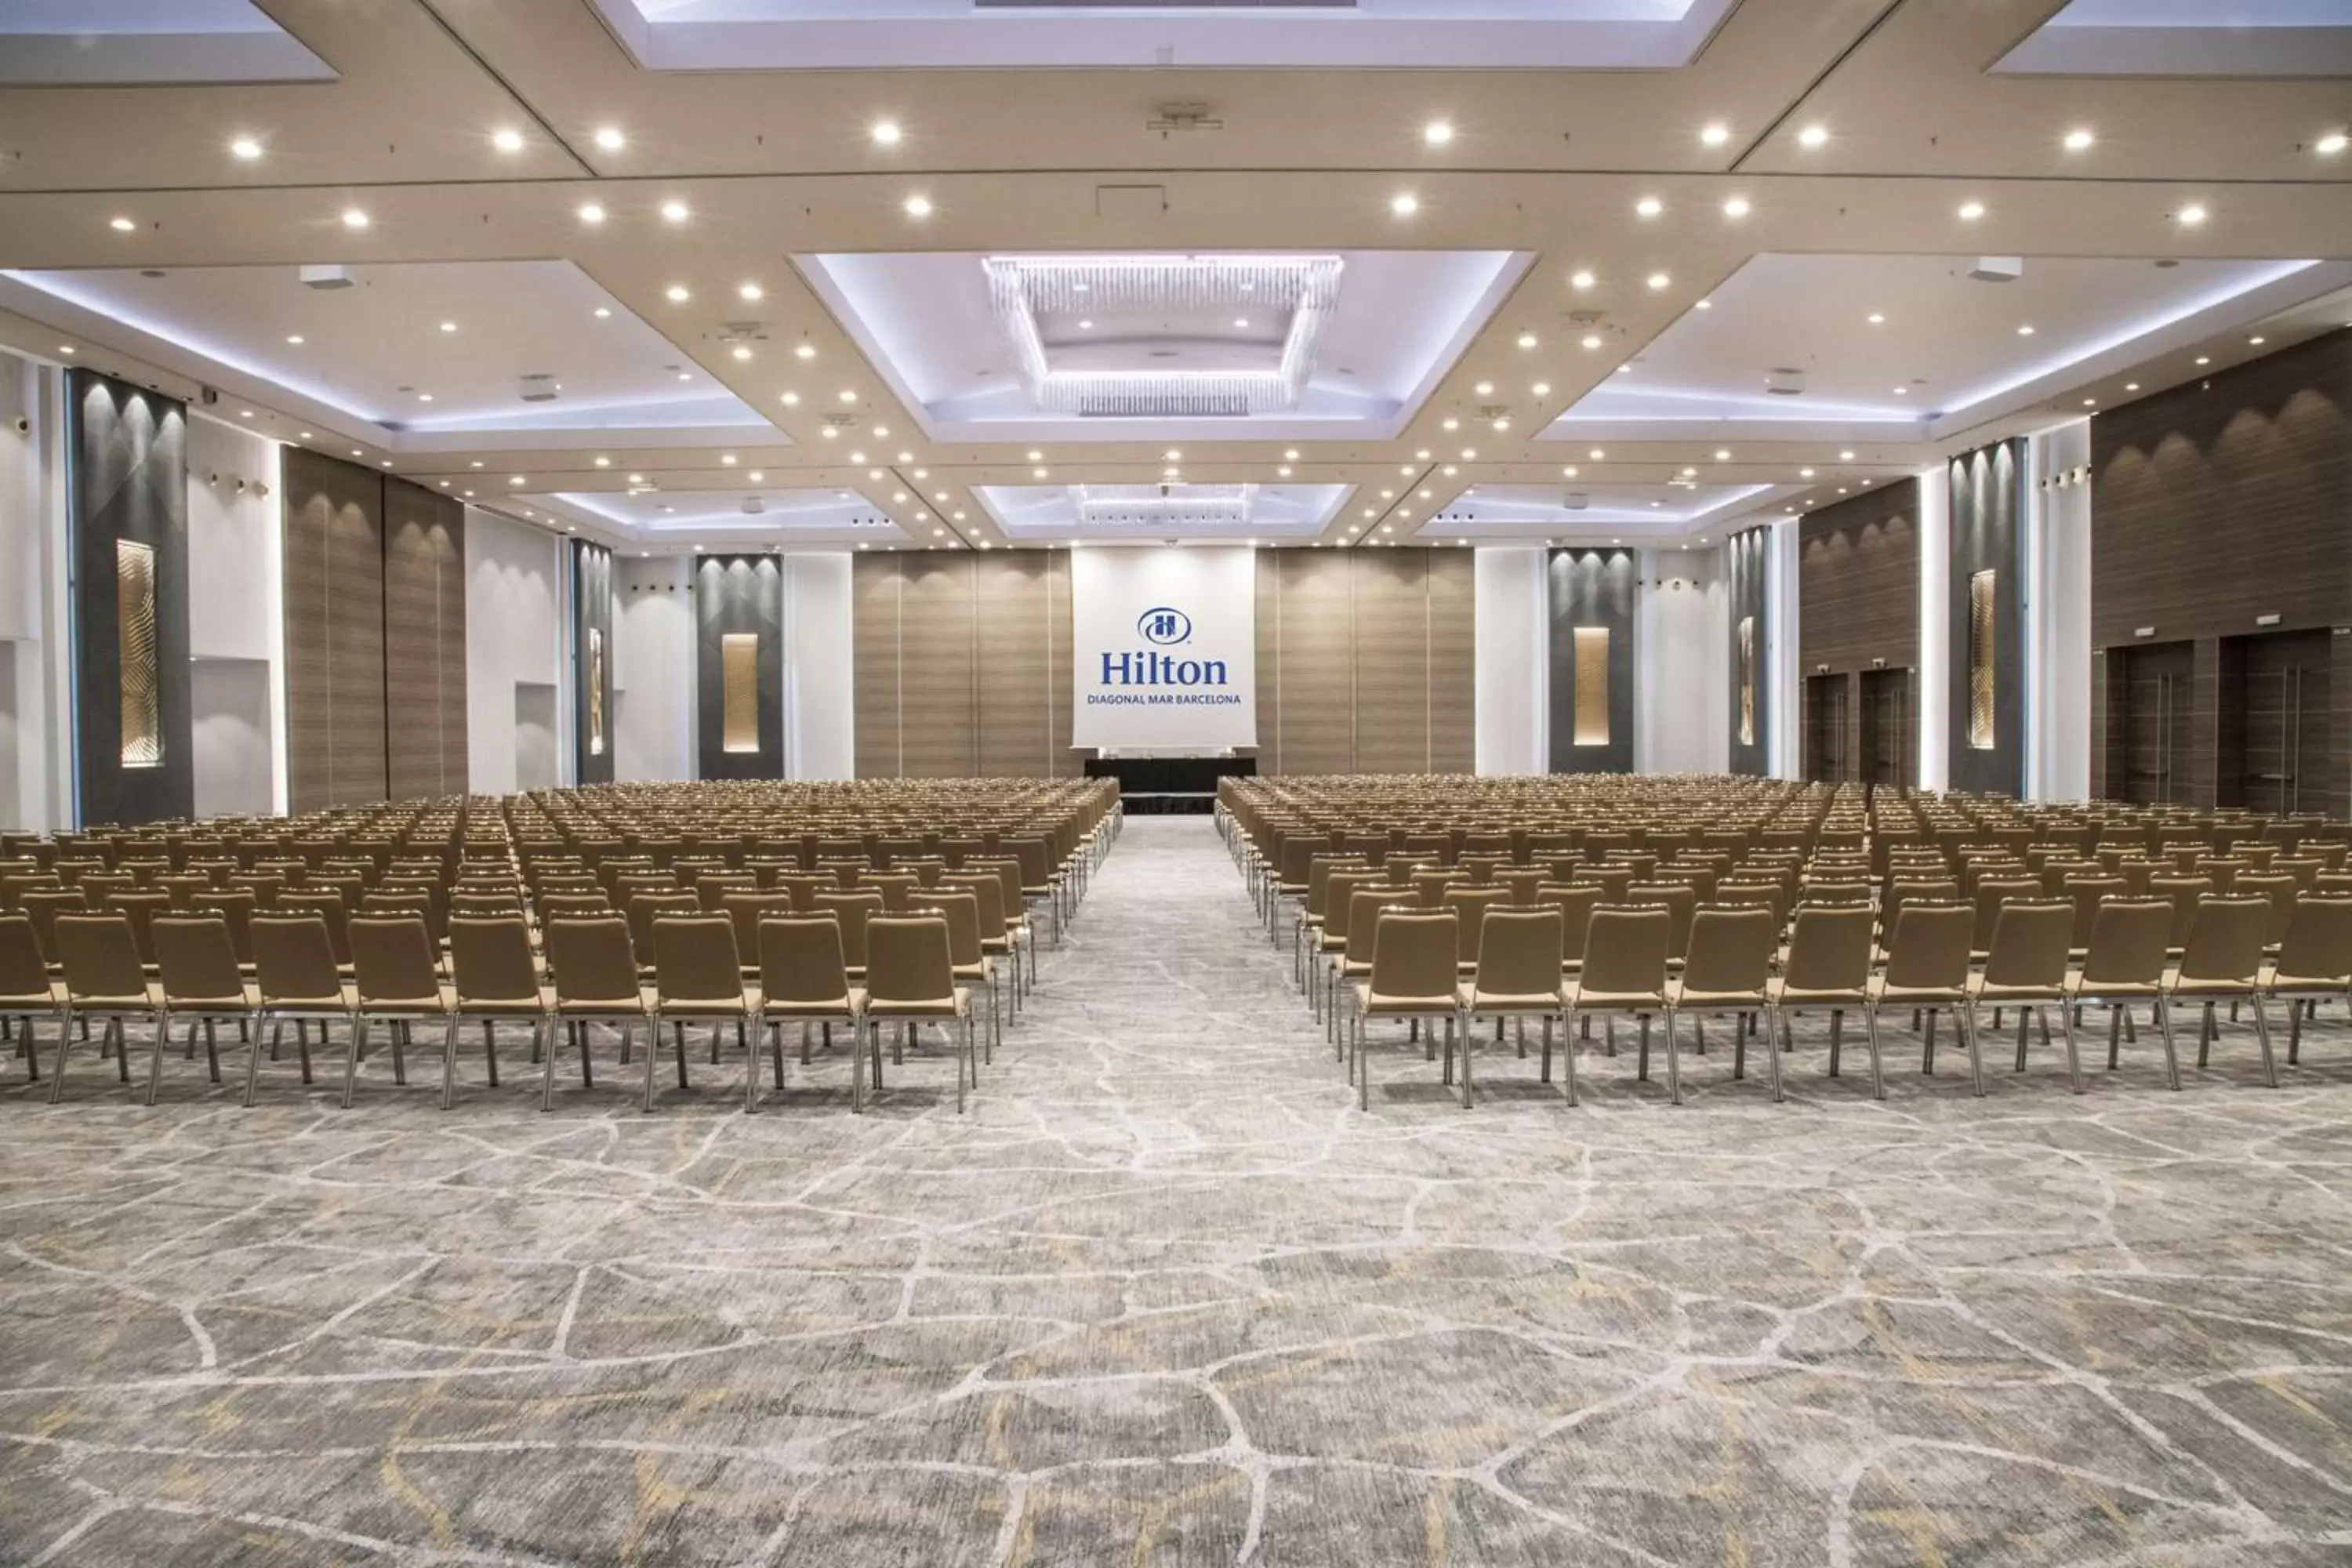 Meeting/conference room in Hilton Diagonal Mar Barcelona